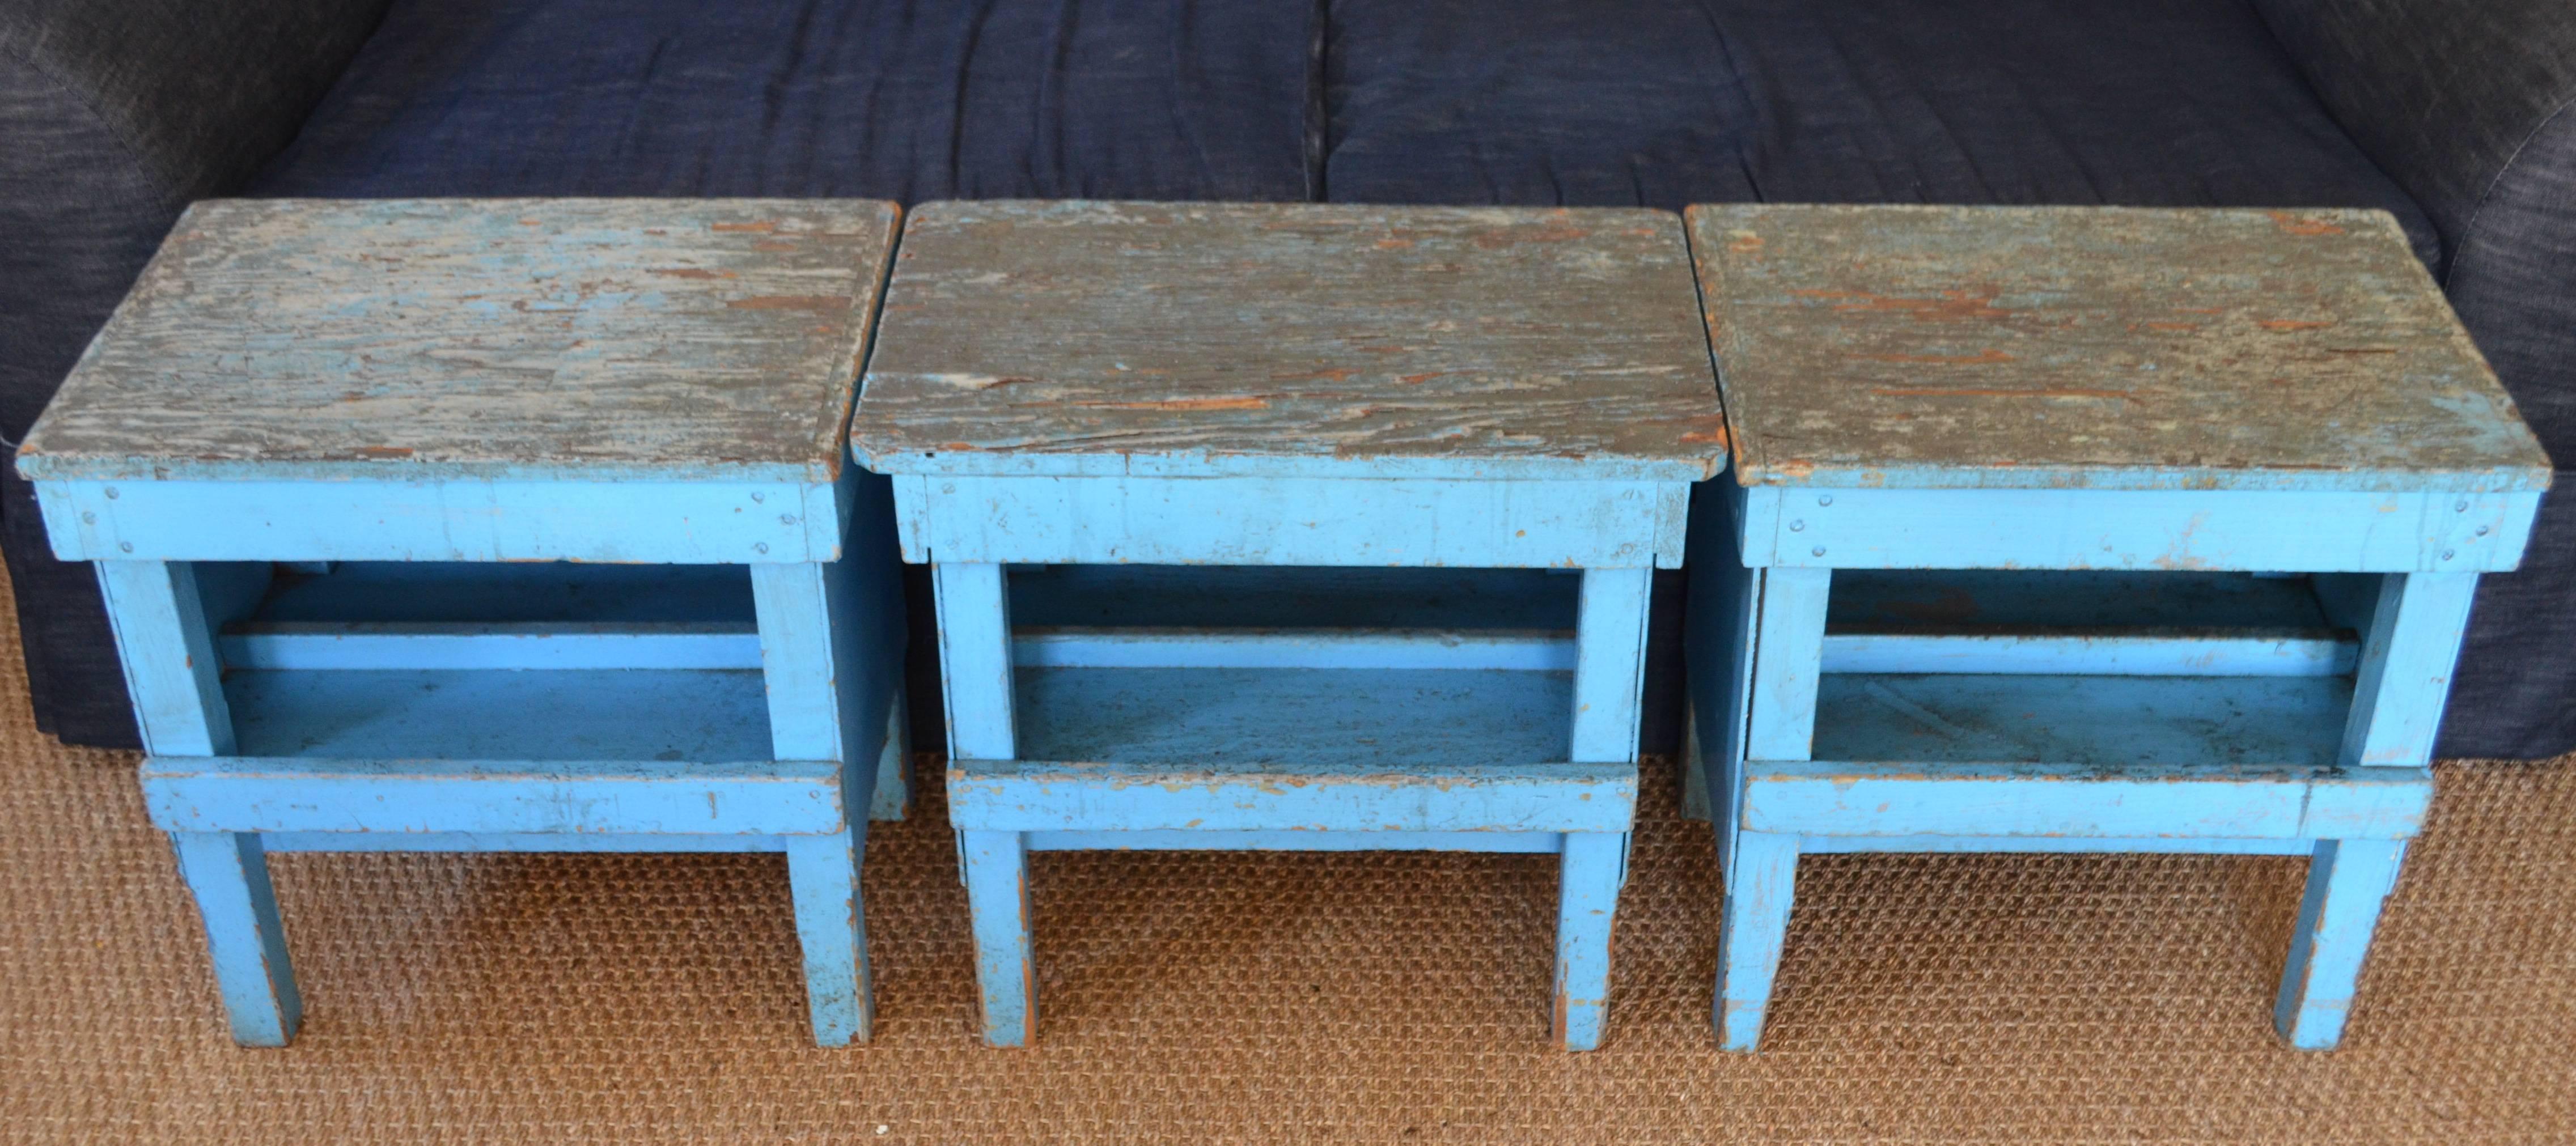 End Tables/Benches from Industrial Factory Work Tables 'Set of 3' 4